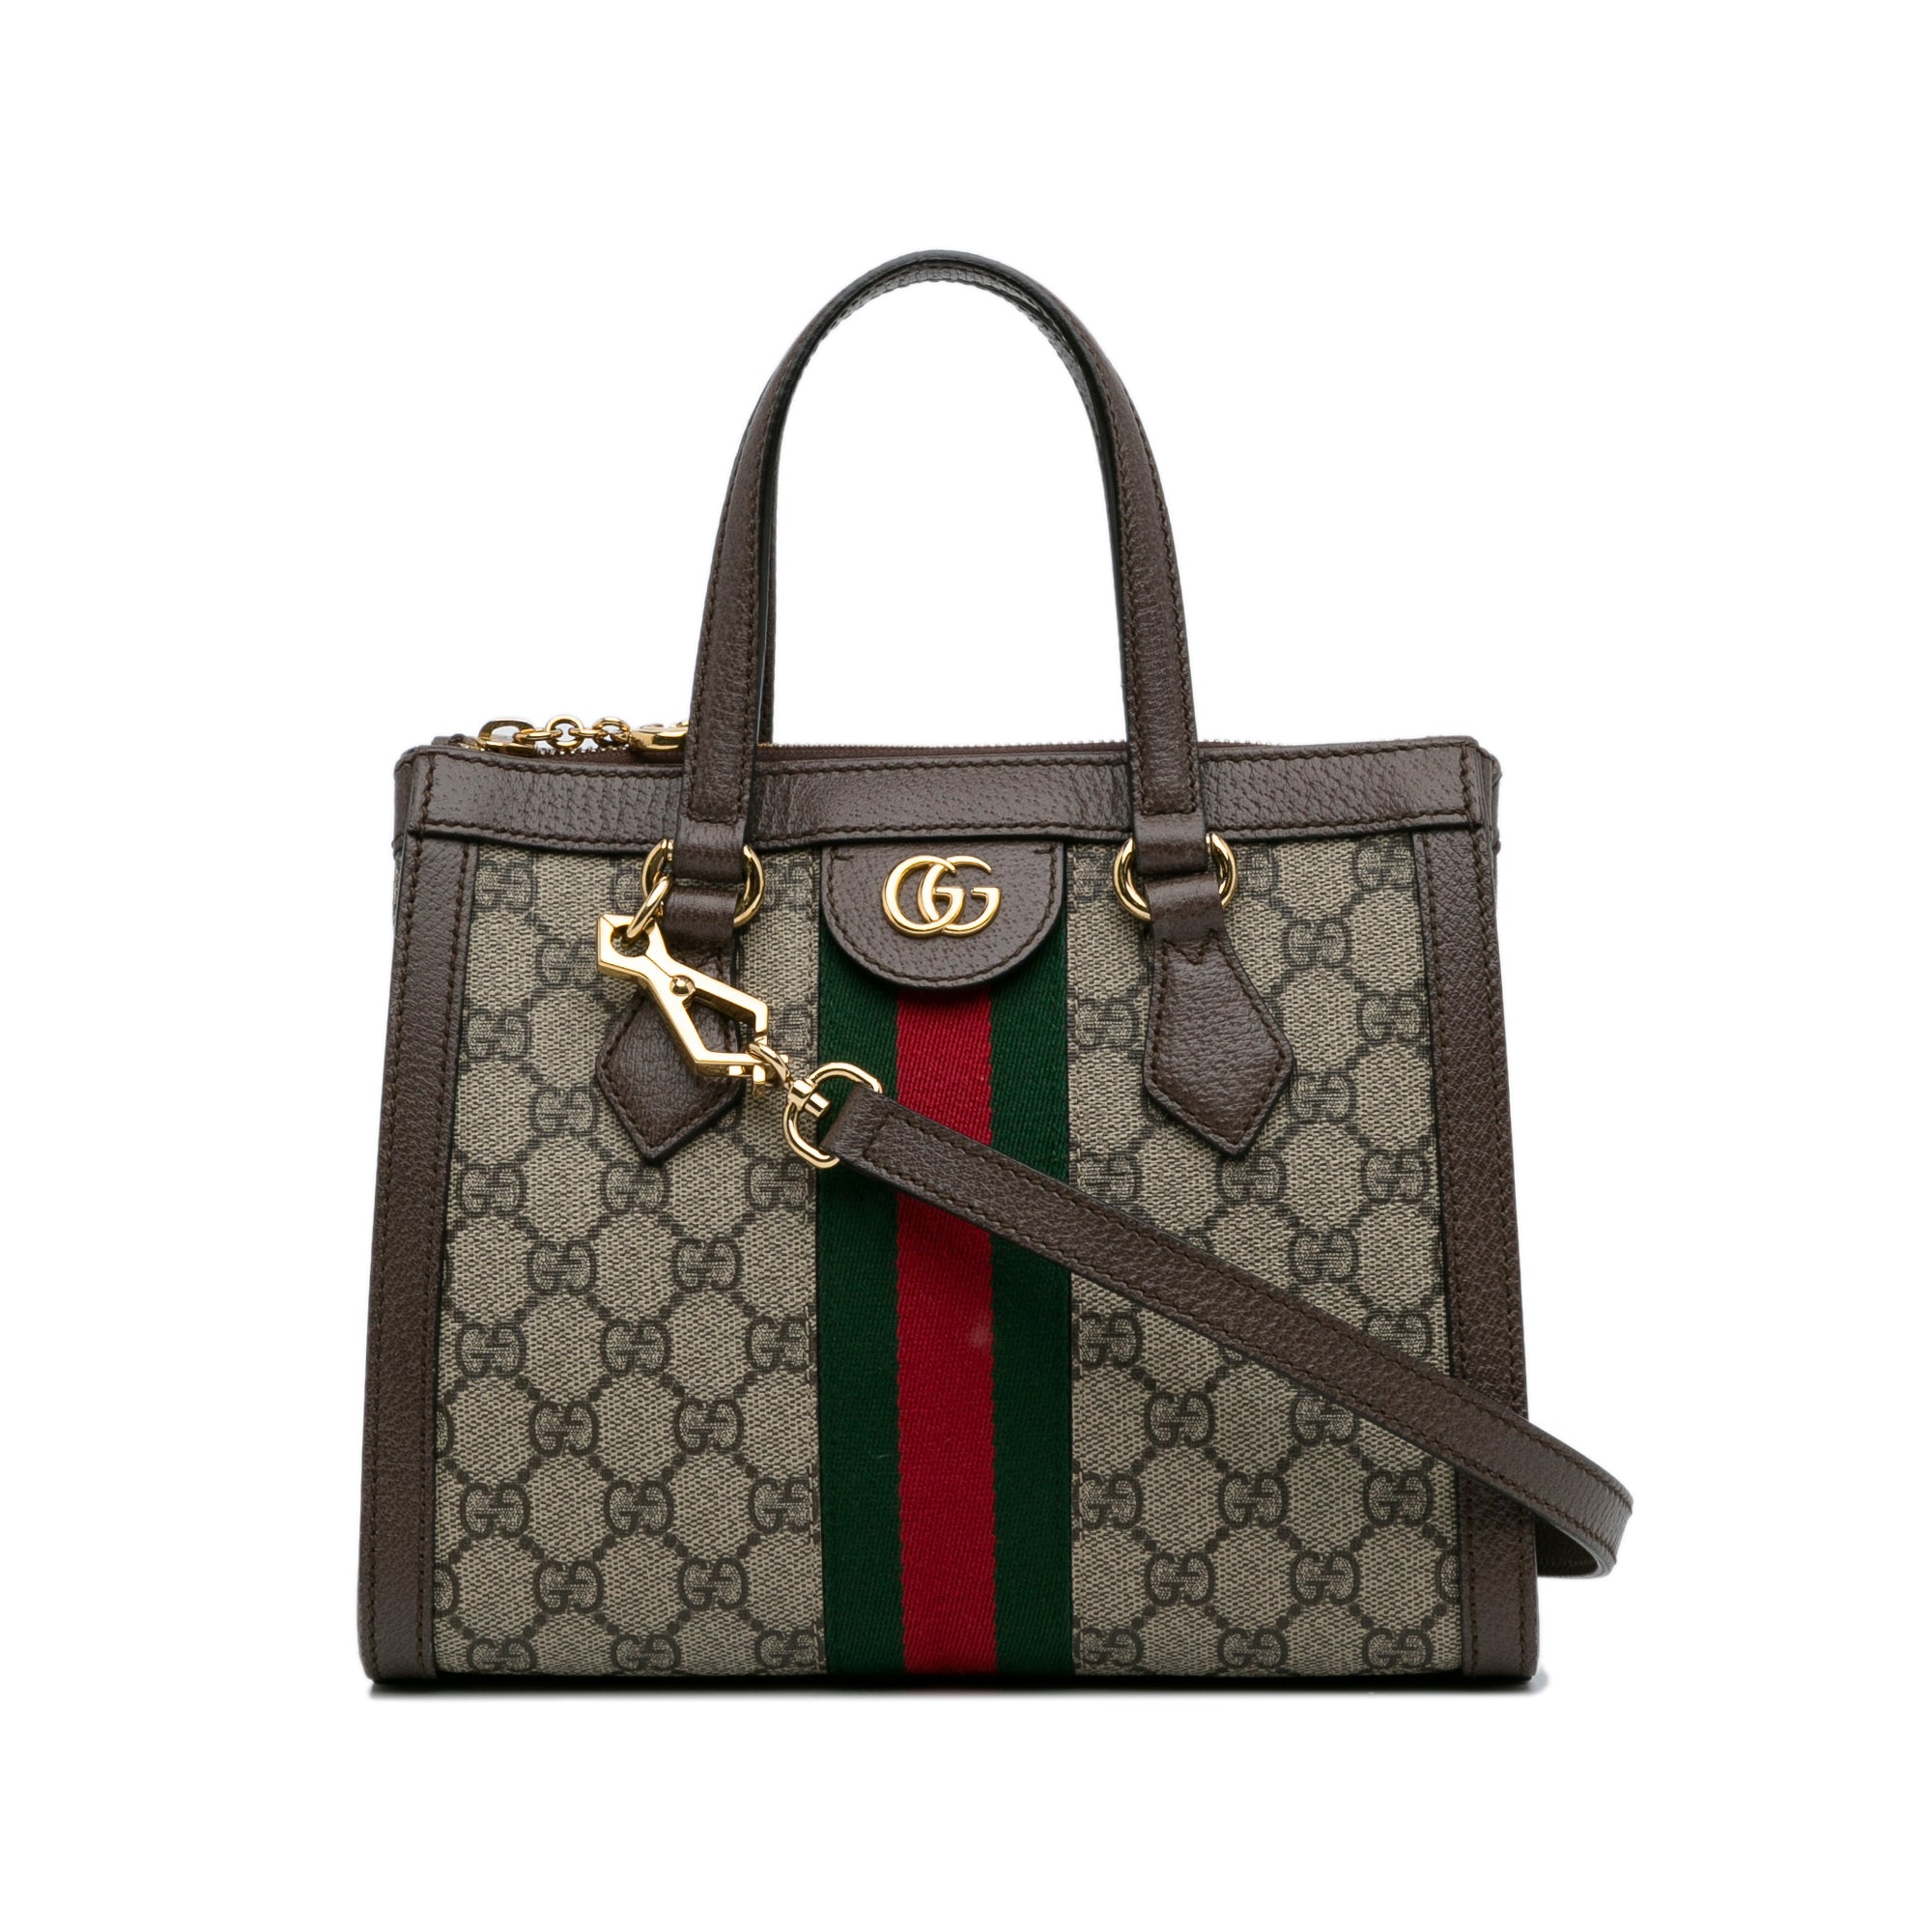 Ophidia Small Canvas Shoulder Bag in Beige - Gucci